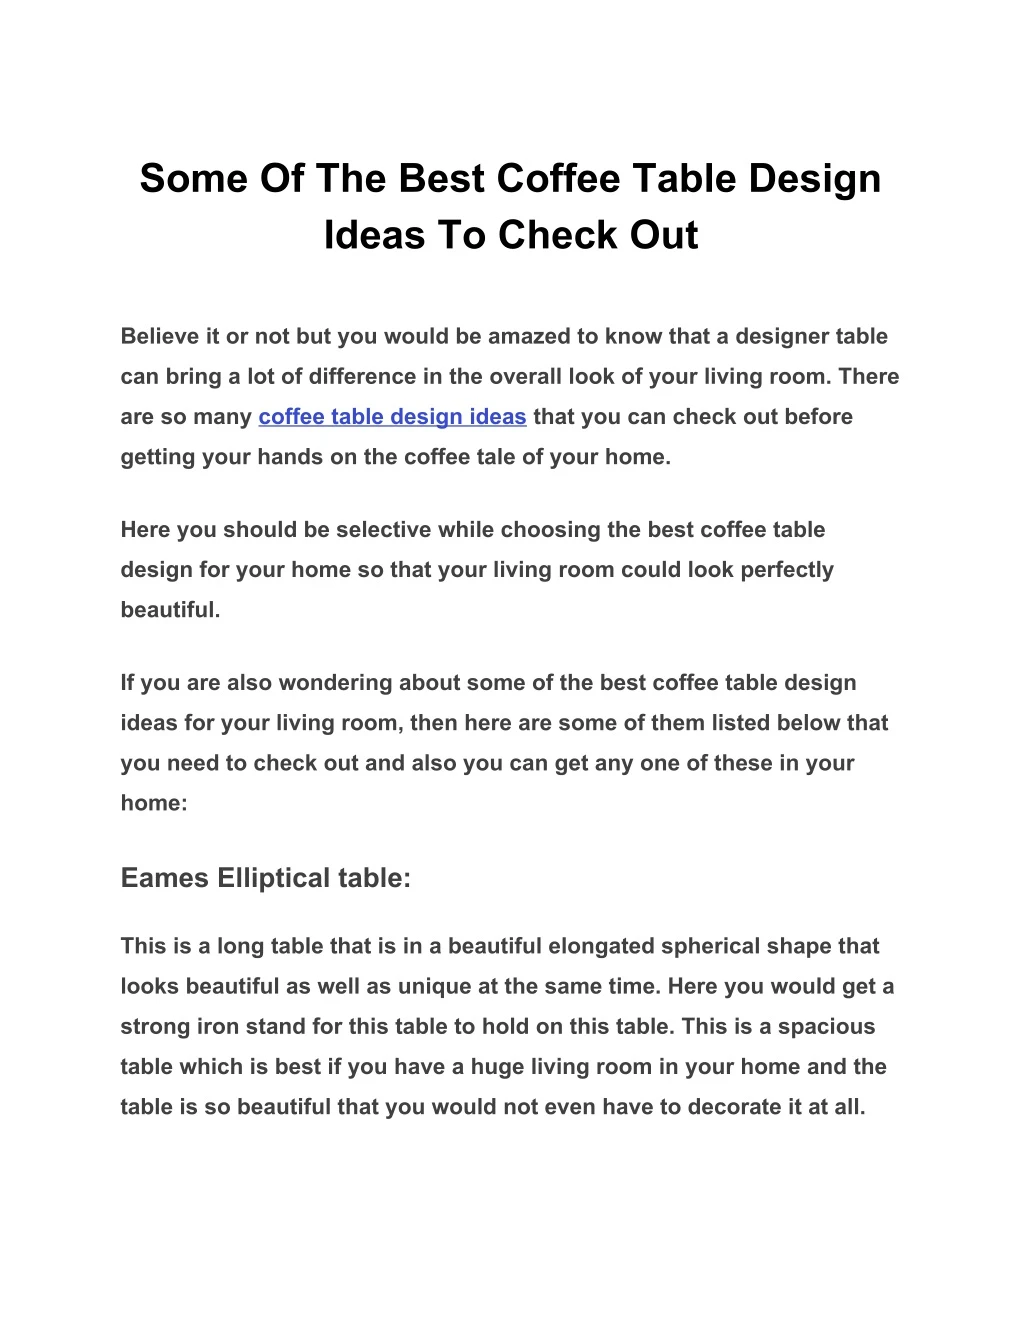 some of the best coffee table design ideas